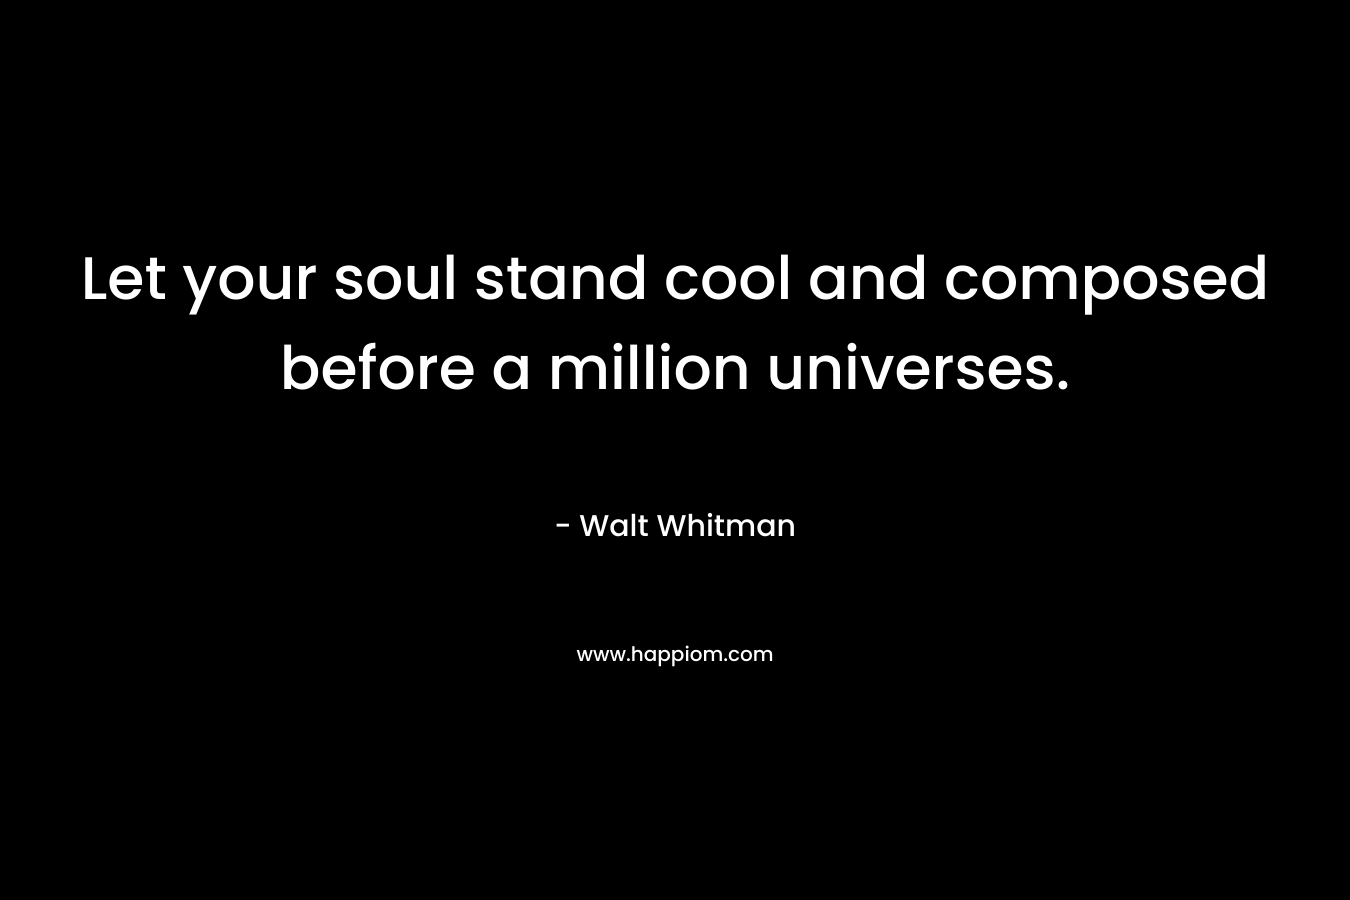 Let your soul stand cool and composed before a million universes. – Walt Whitman